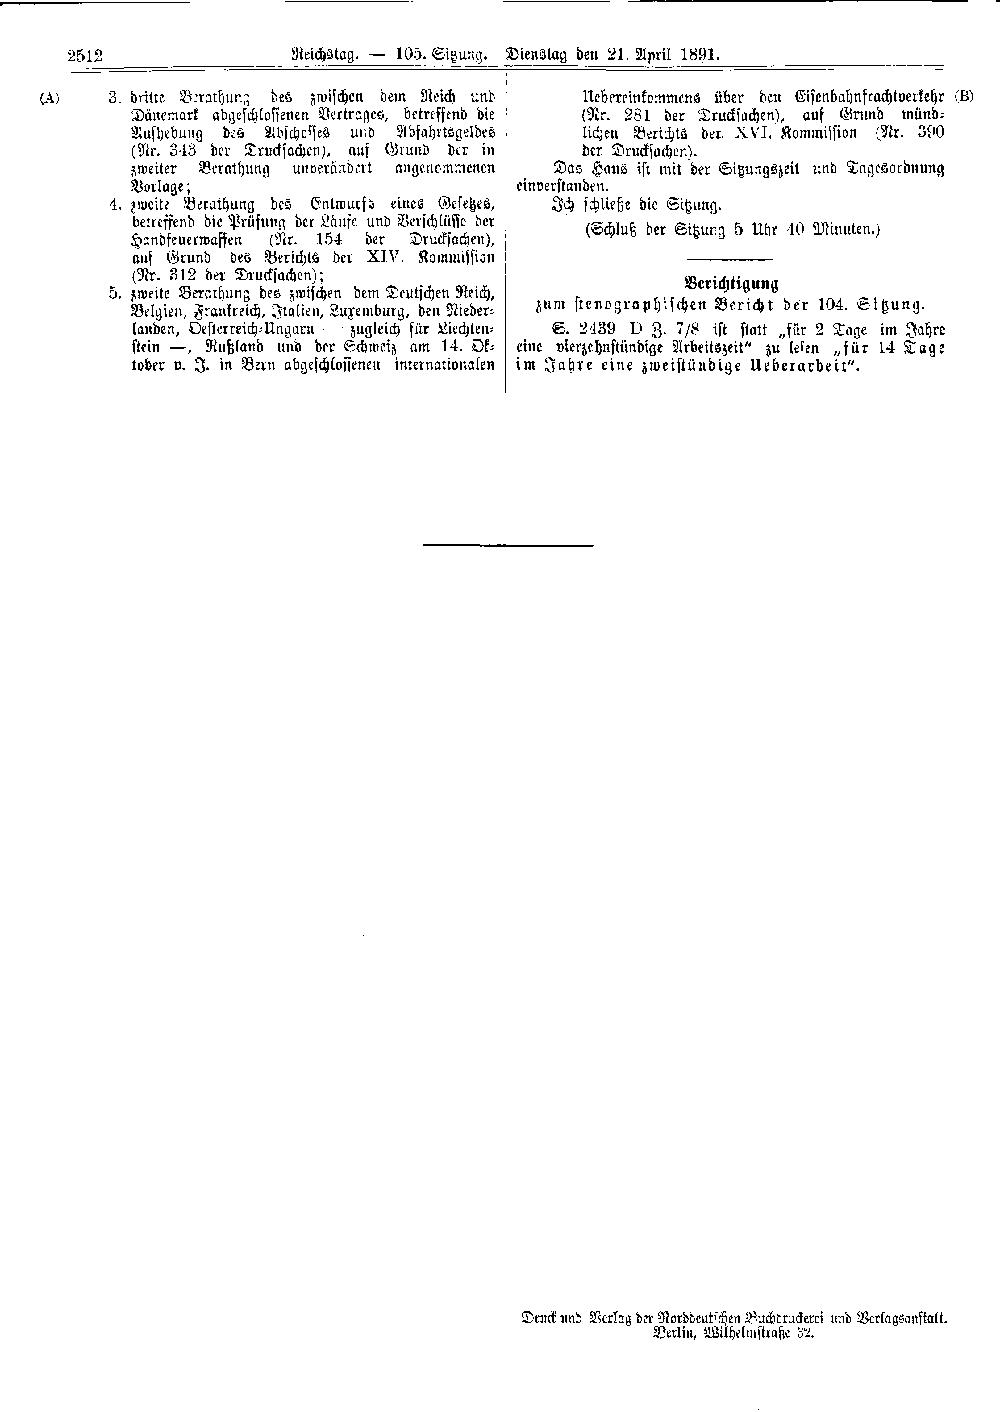 Scan of page 2512